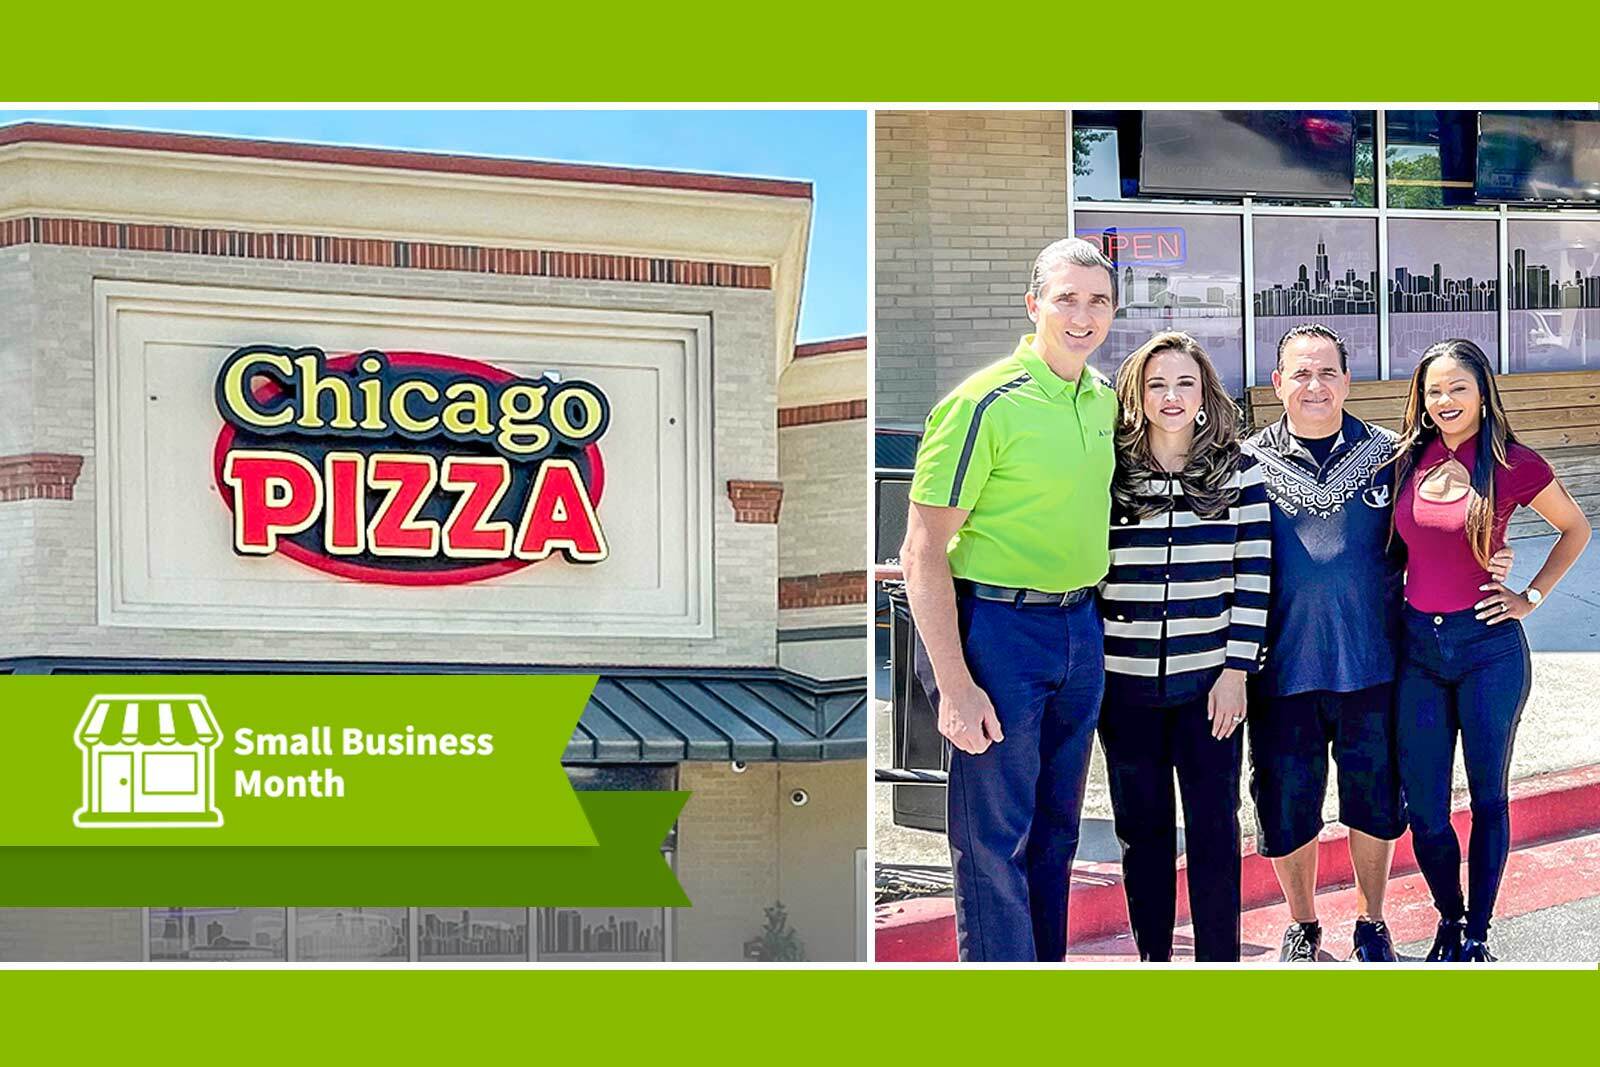 chicago pizza exterior, owner group photo and small business month...